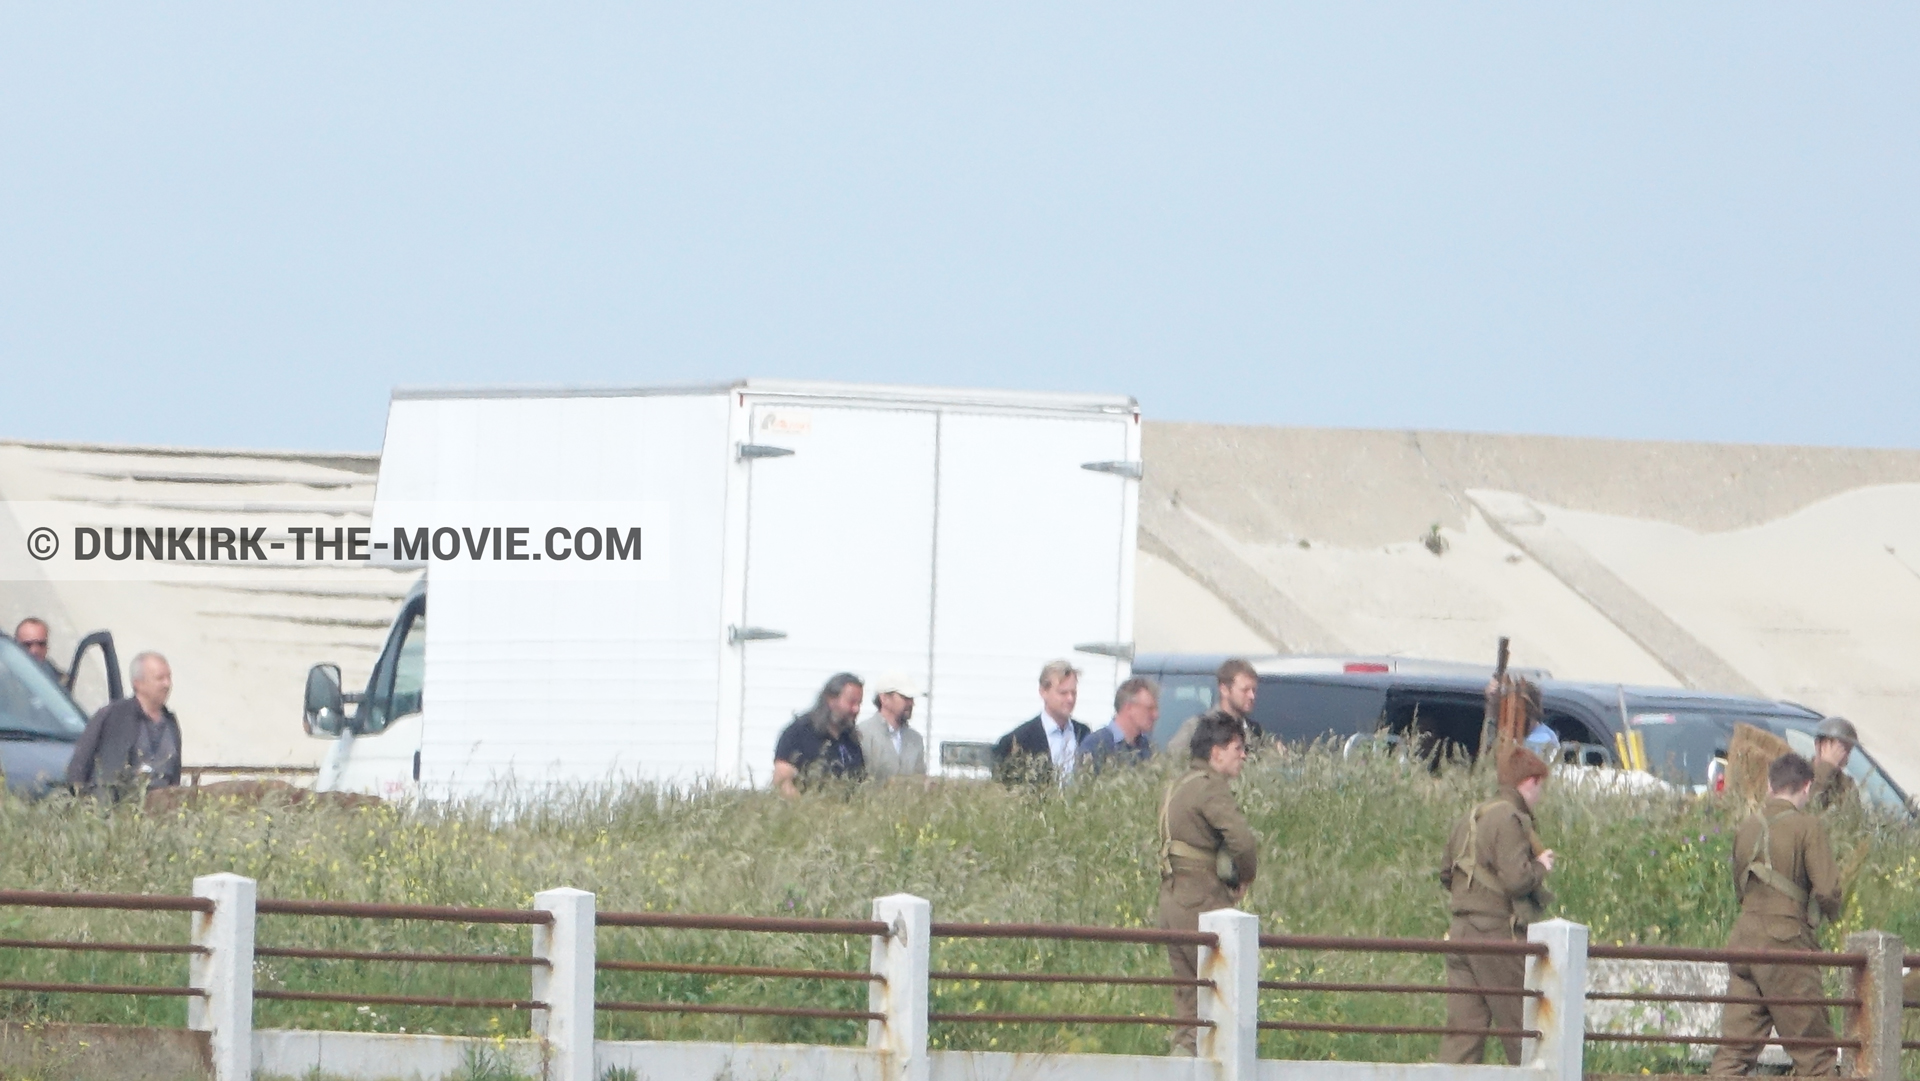 Picture with supernumeraries, Hoyte van Hoytema, Christopher Nolan,  from behind the scene of the Dunkirk movie by Nolan